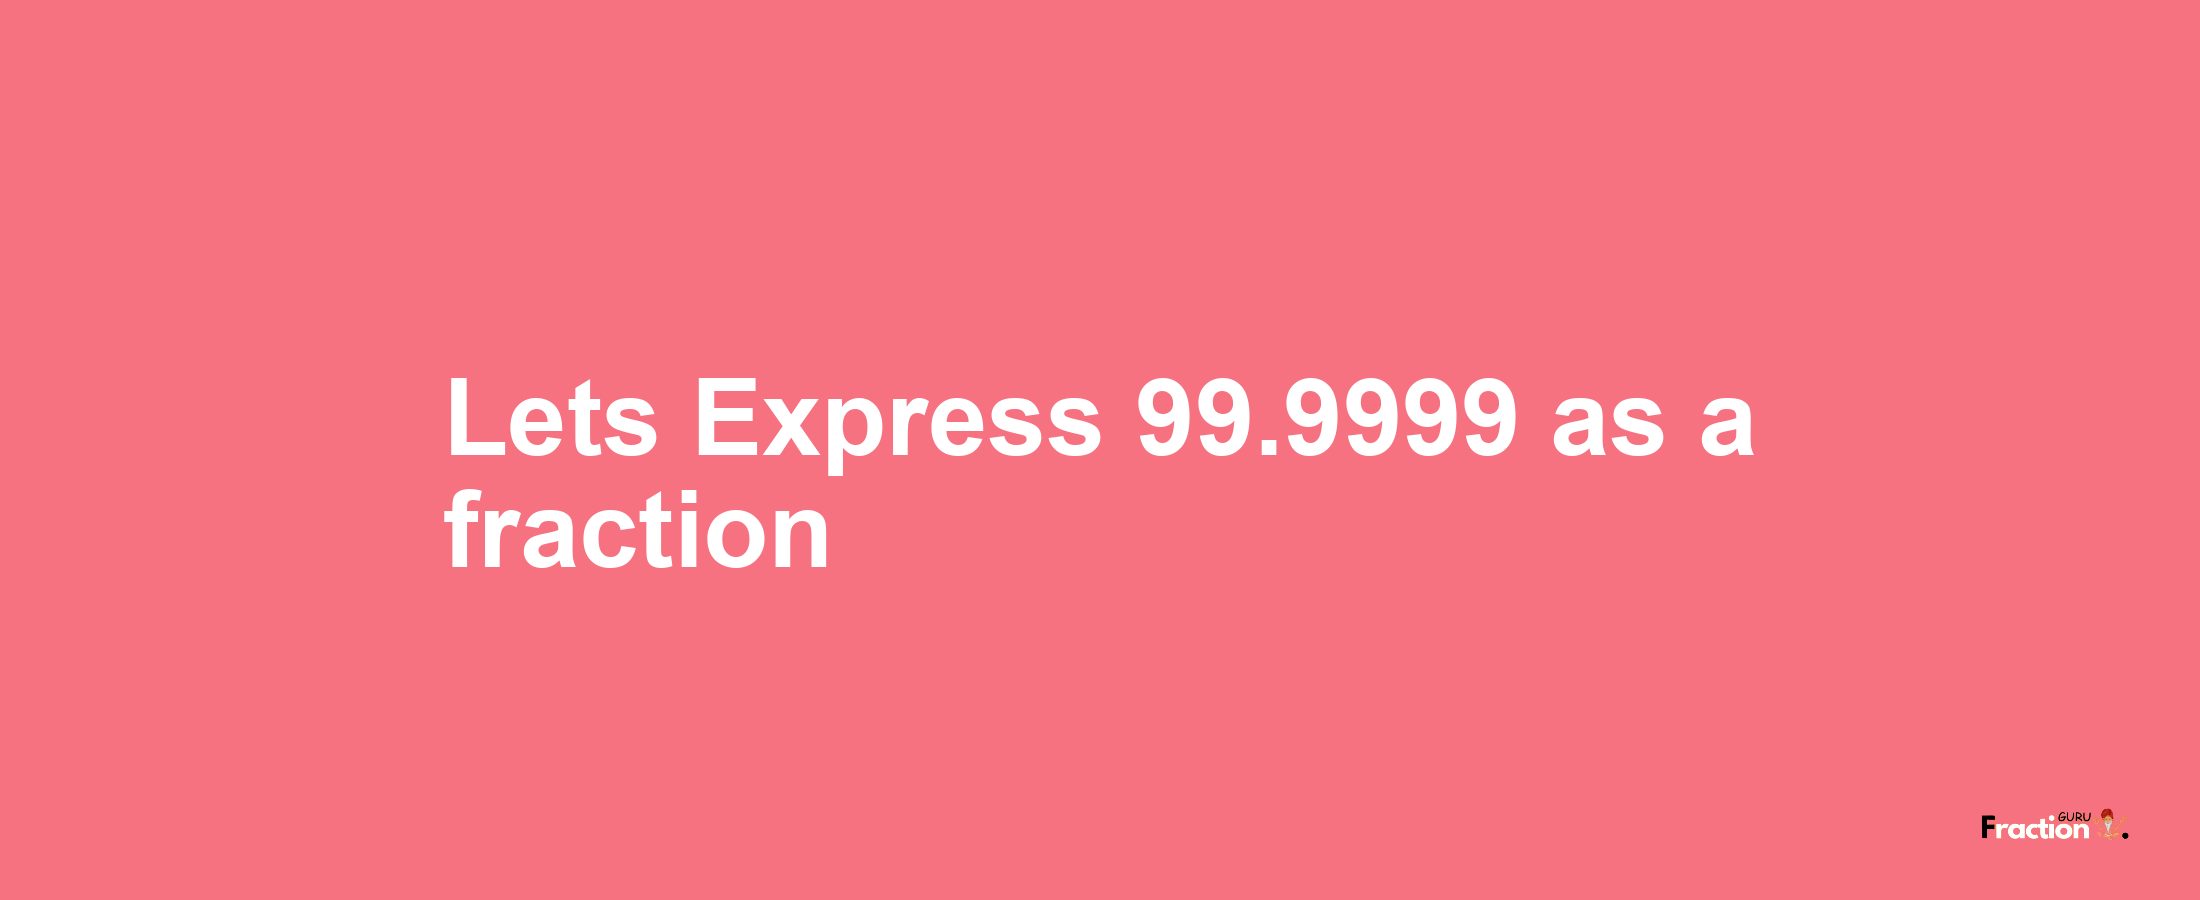 Lets Express 99.9999 as afraction